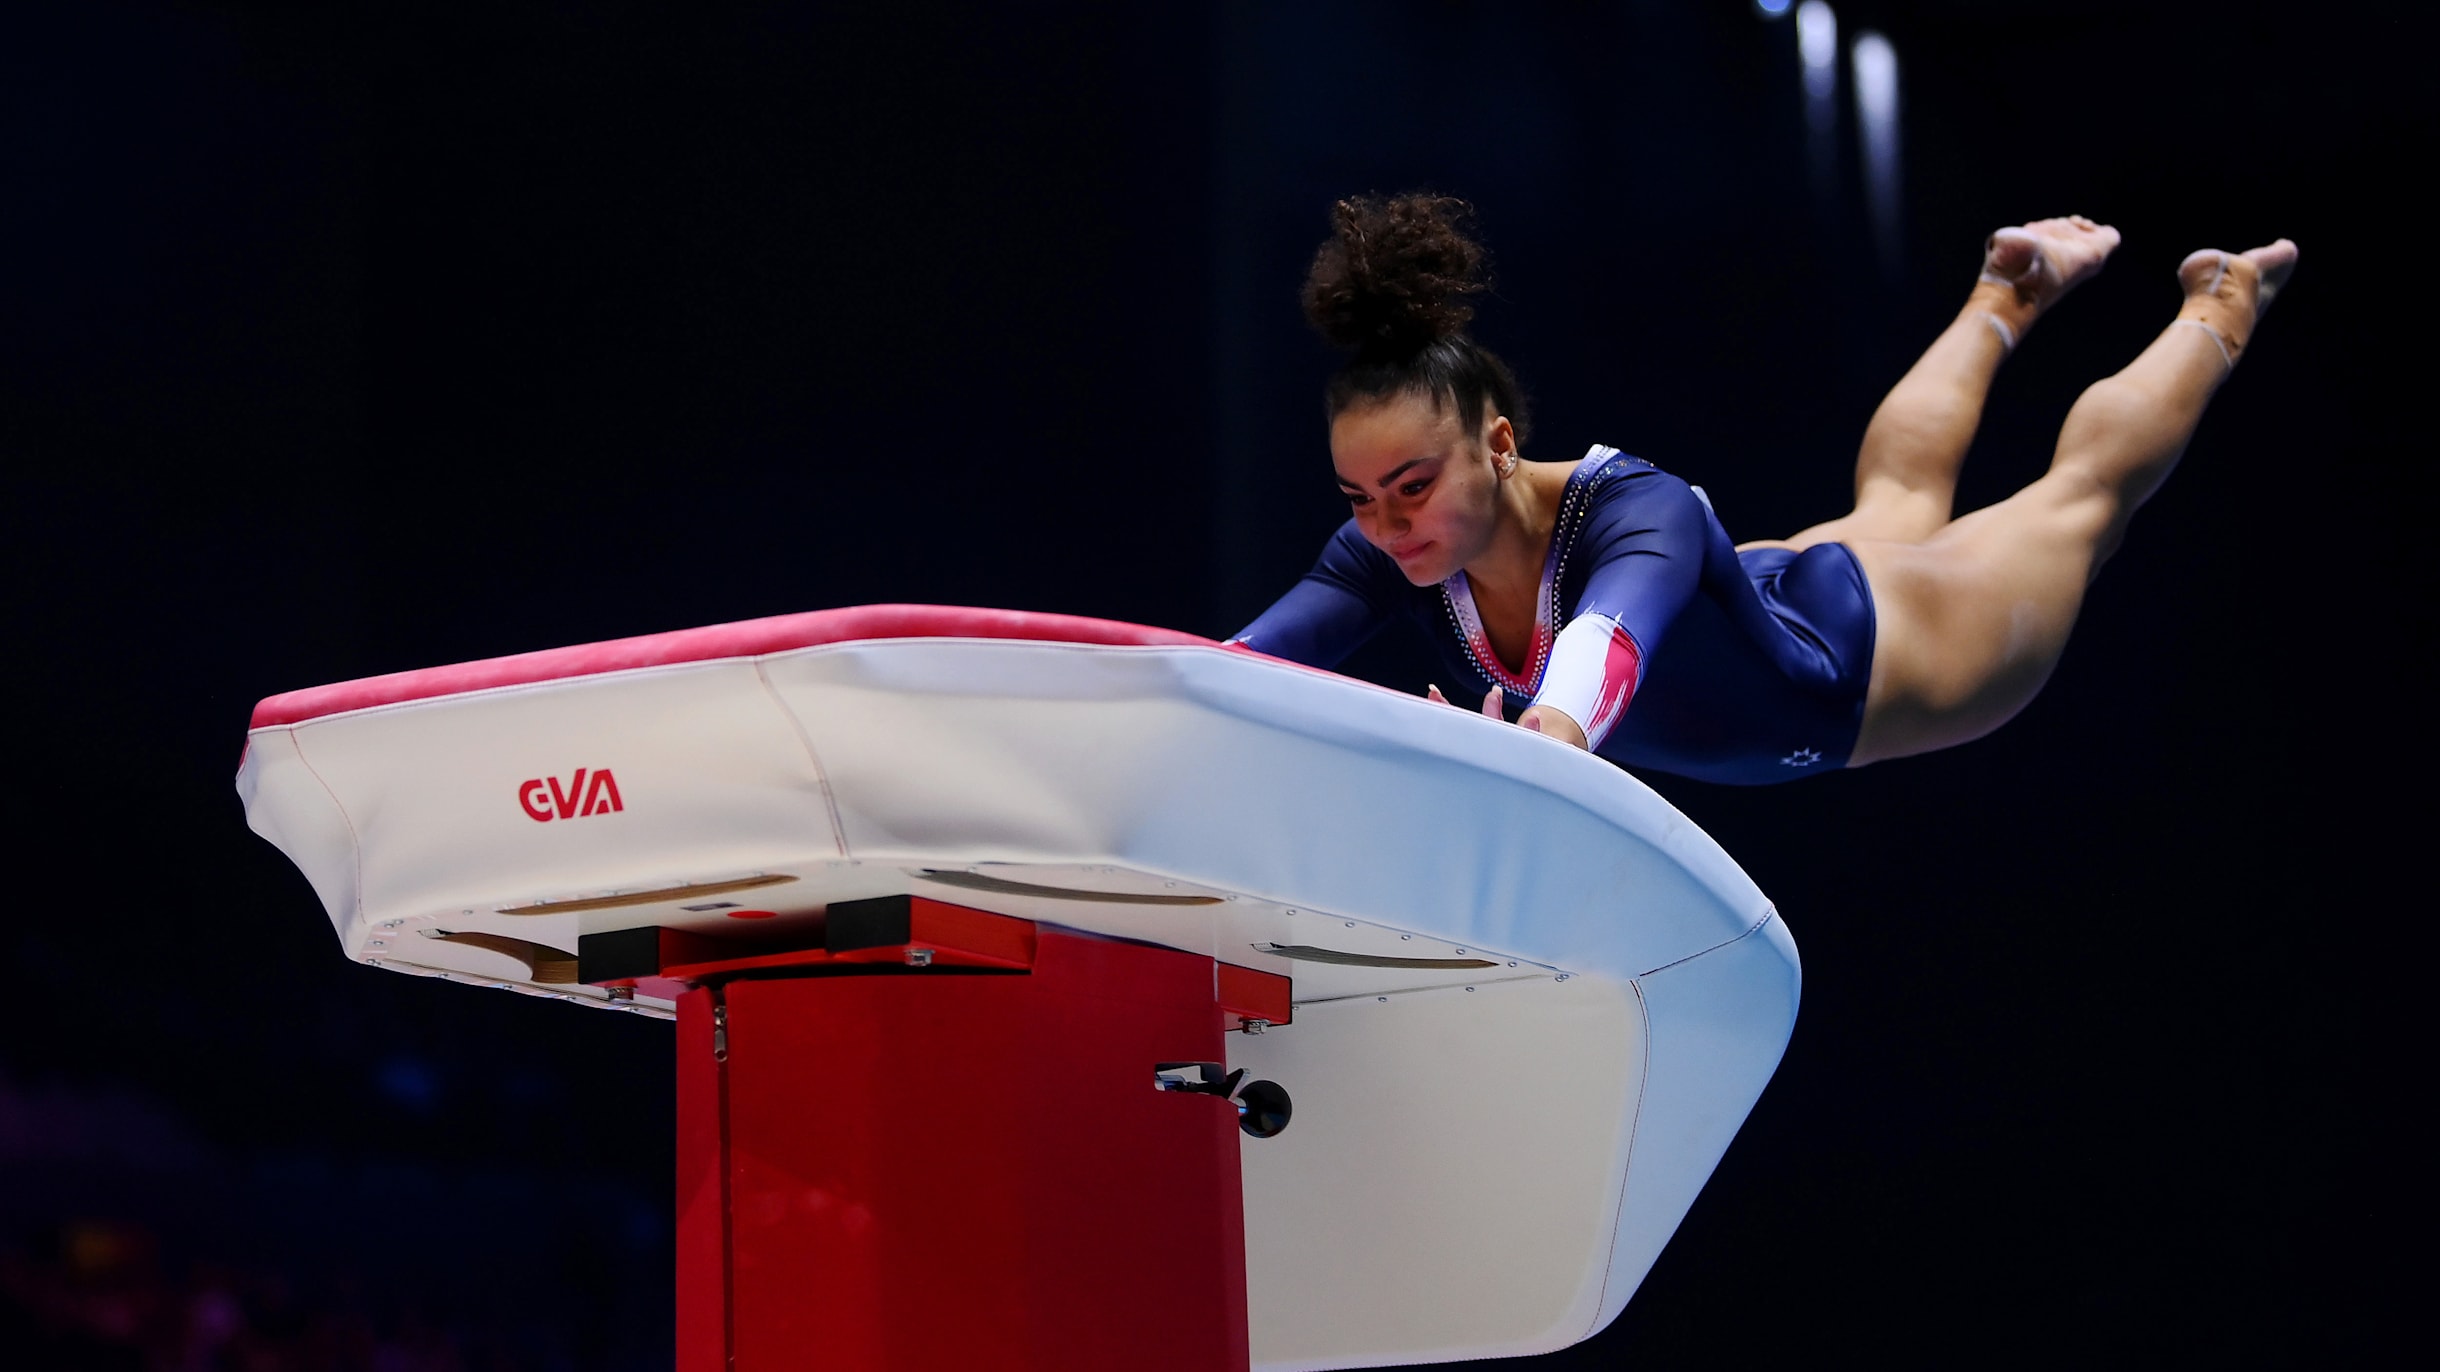 How to qualify for artistic gymnastics at Paris 2024. The Olympics